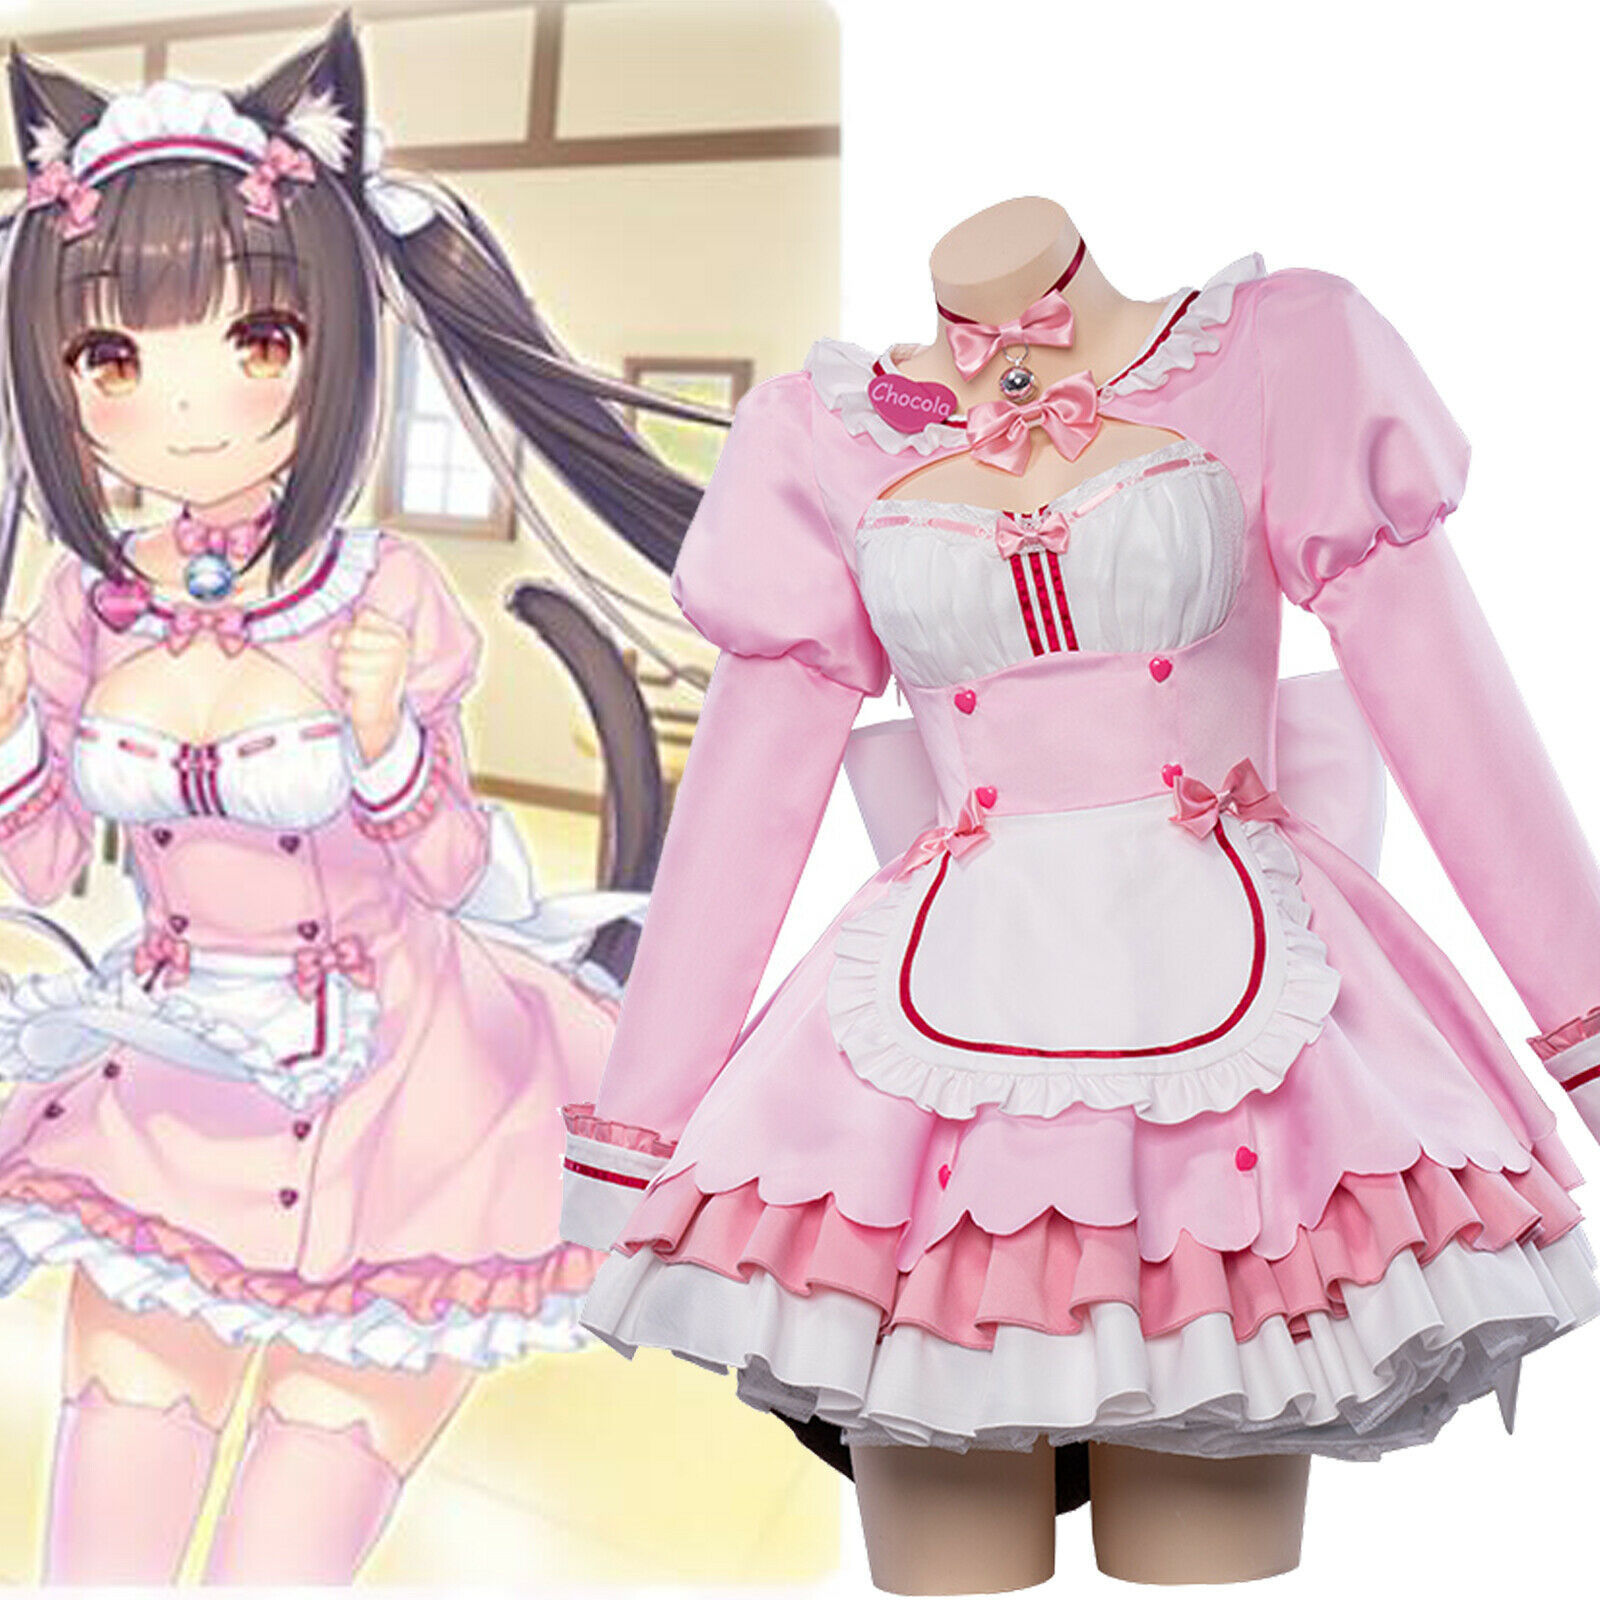 Cat Girl Paradise Outfit Chocolate and Vanilla Maid Outfit Cat Girl Play Outfit Game Play